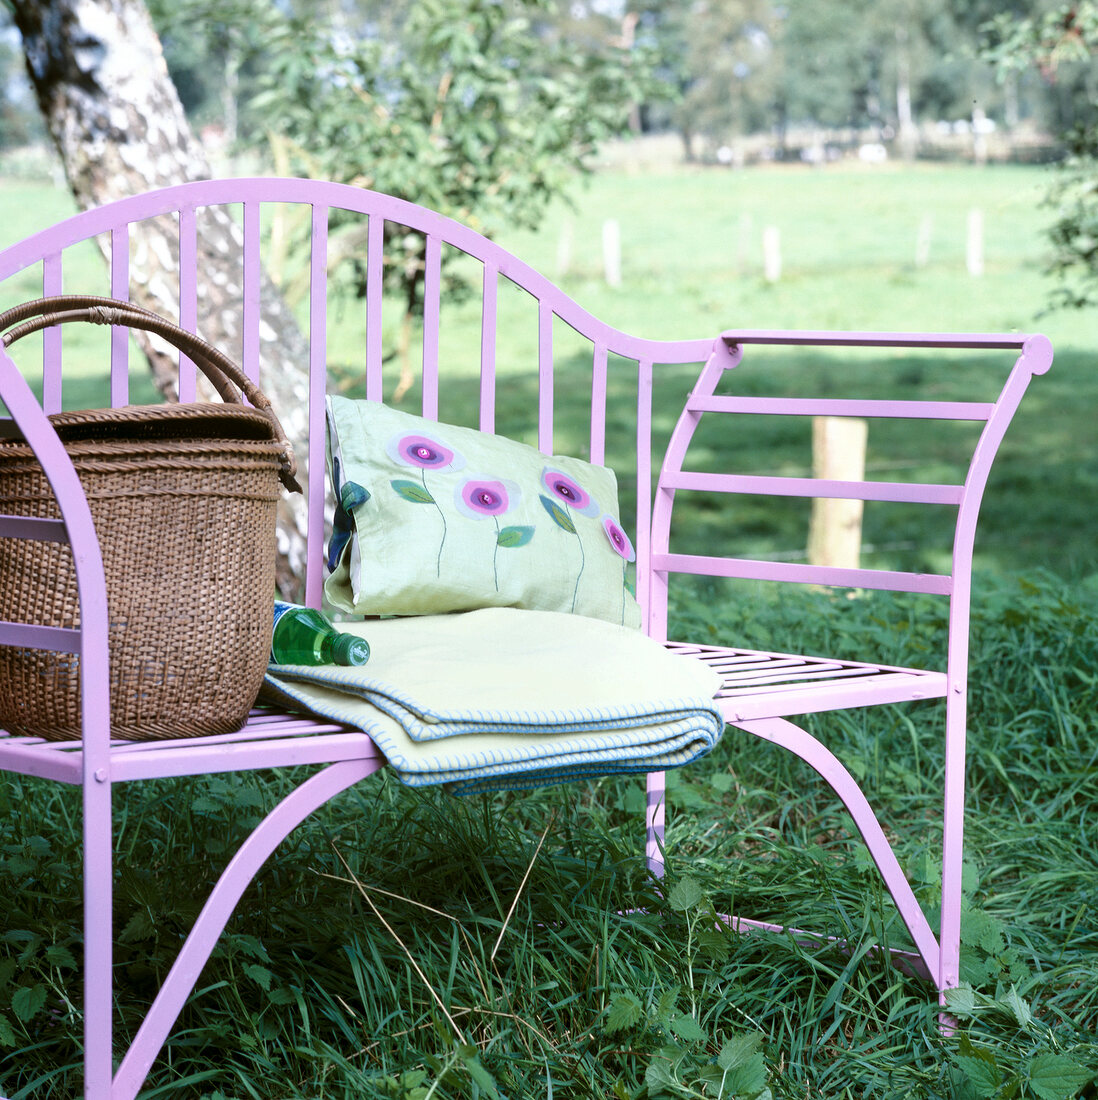 Purple garden chair with folded blanket, basket and pillow in garden